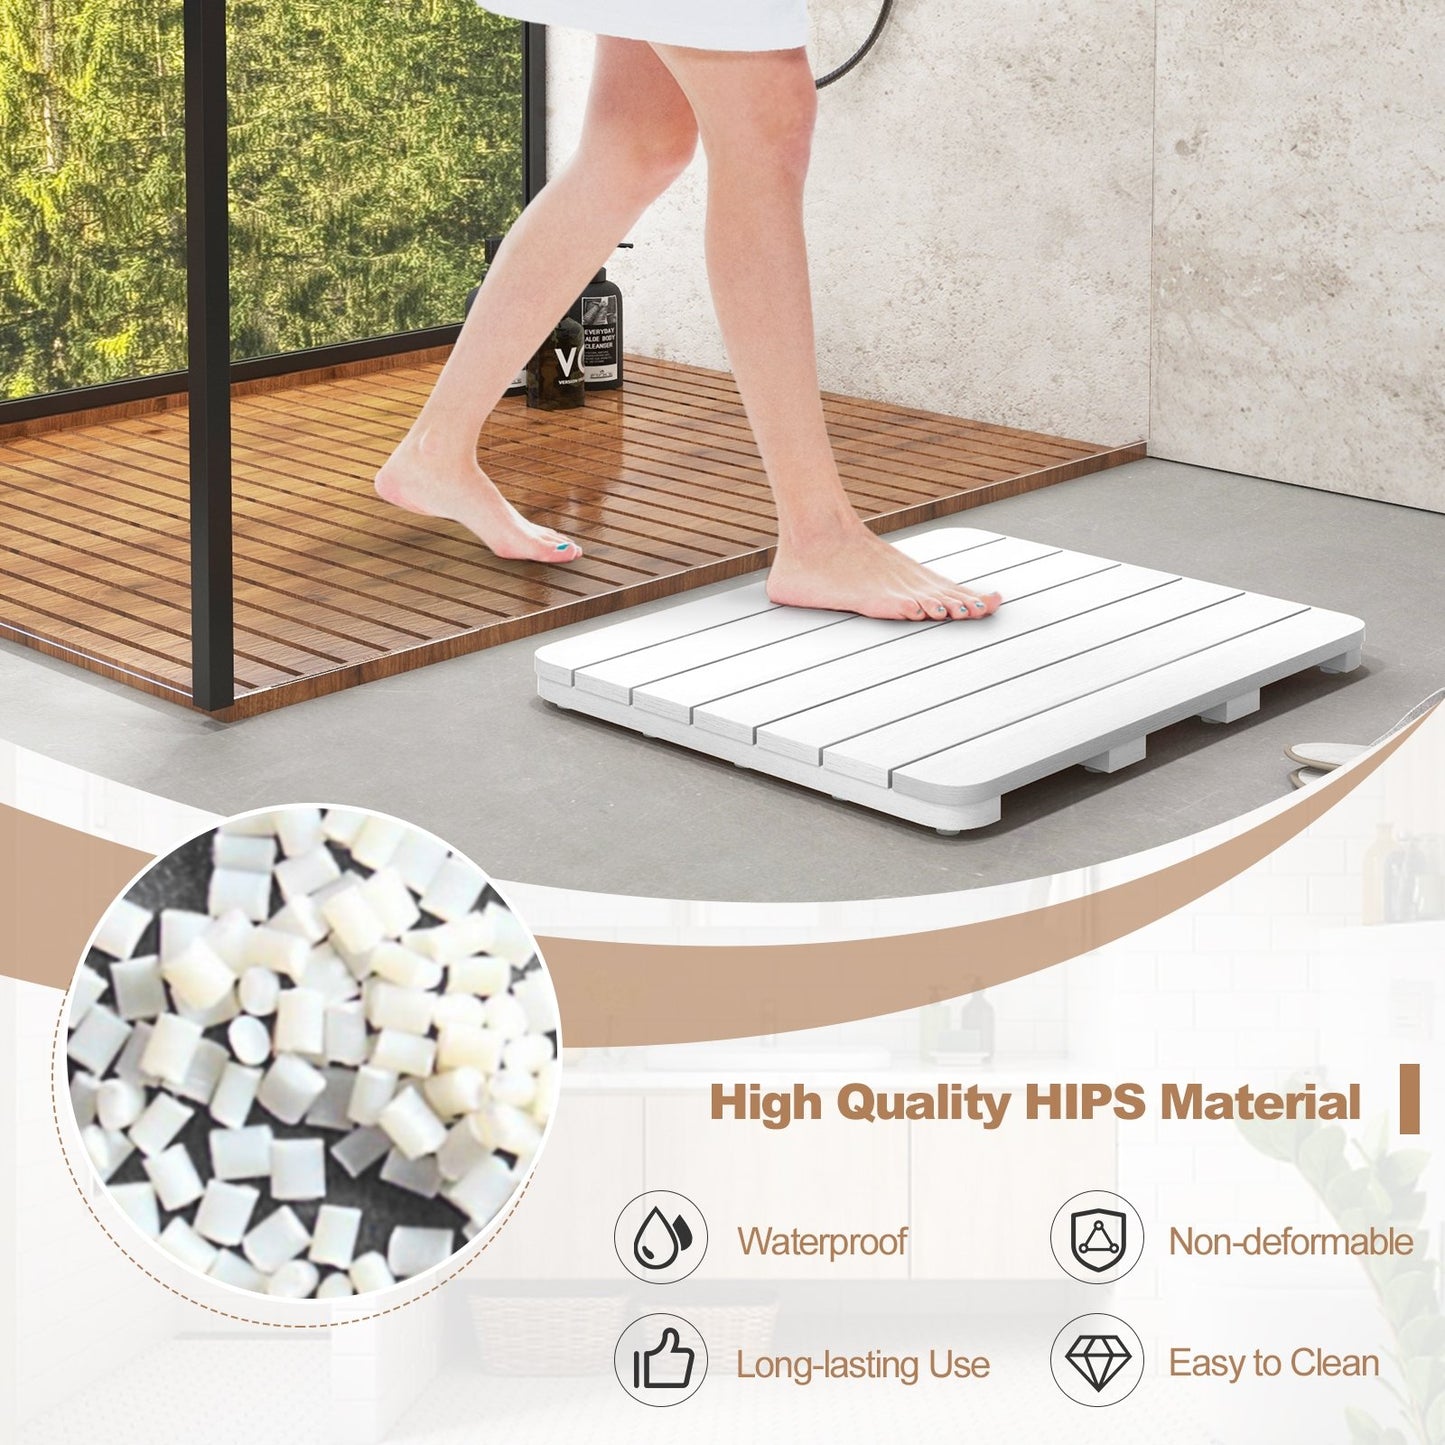 Waterproof HIPS Bath Spa Shower Mat with Non Slip Foot Pads, White